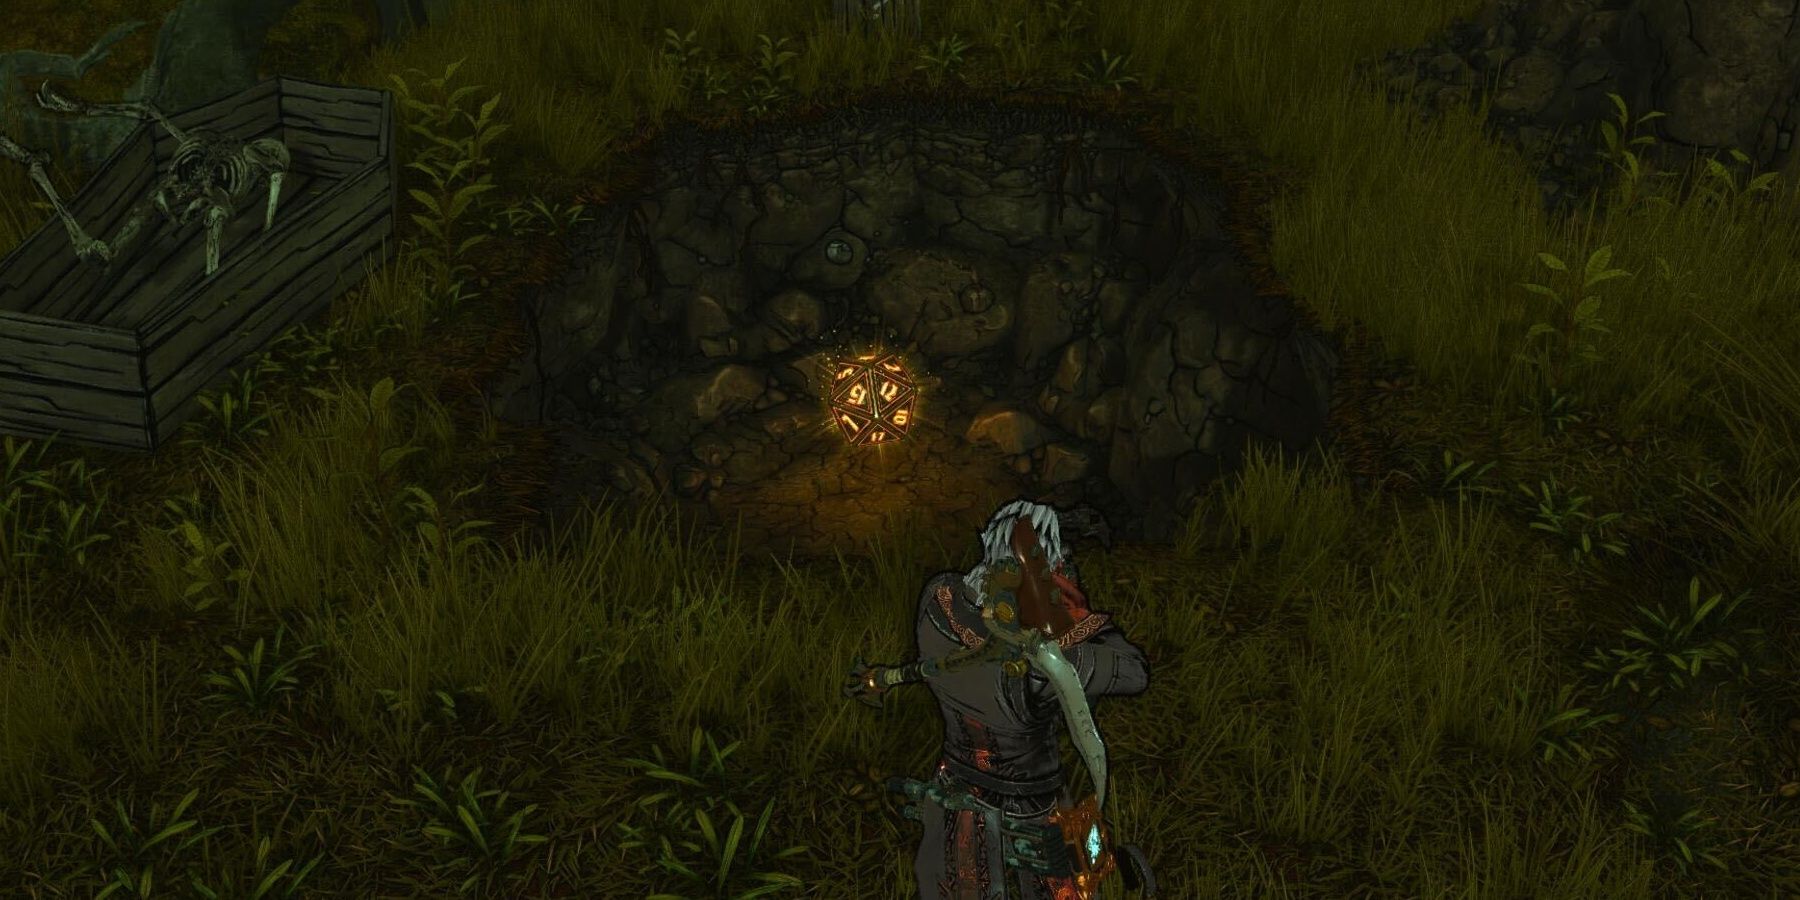 3rd Lucky Dice Locations in Shattergrave Barrow from Tiny Tina’s Wonderland.